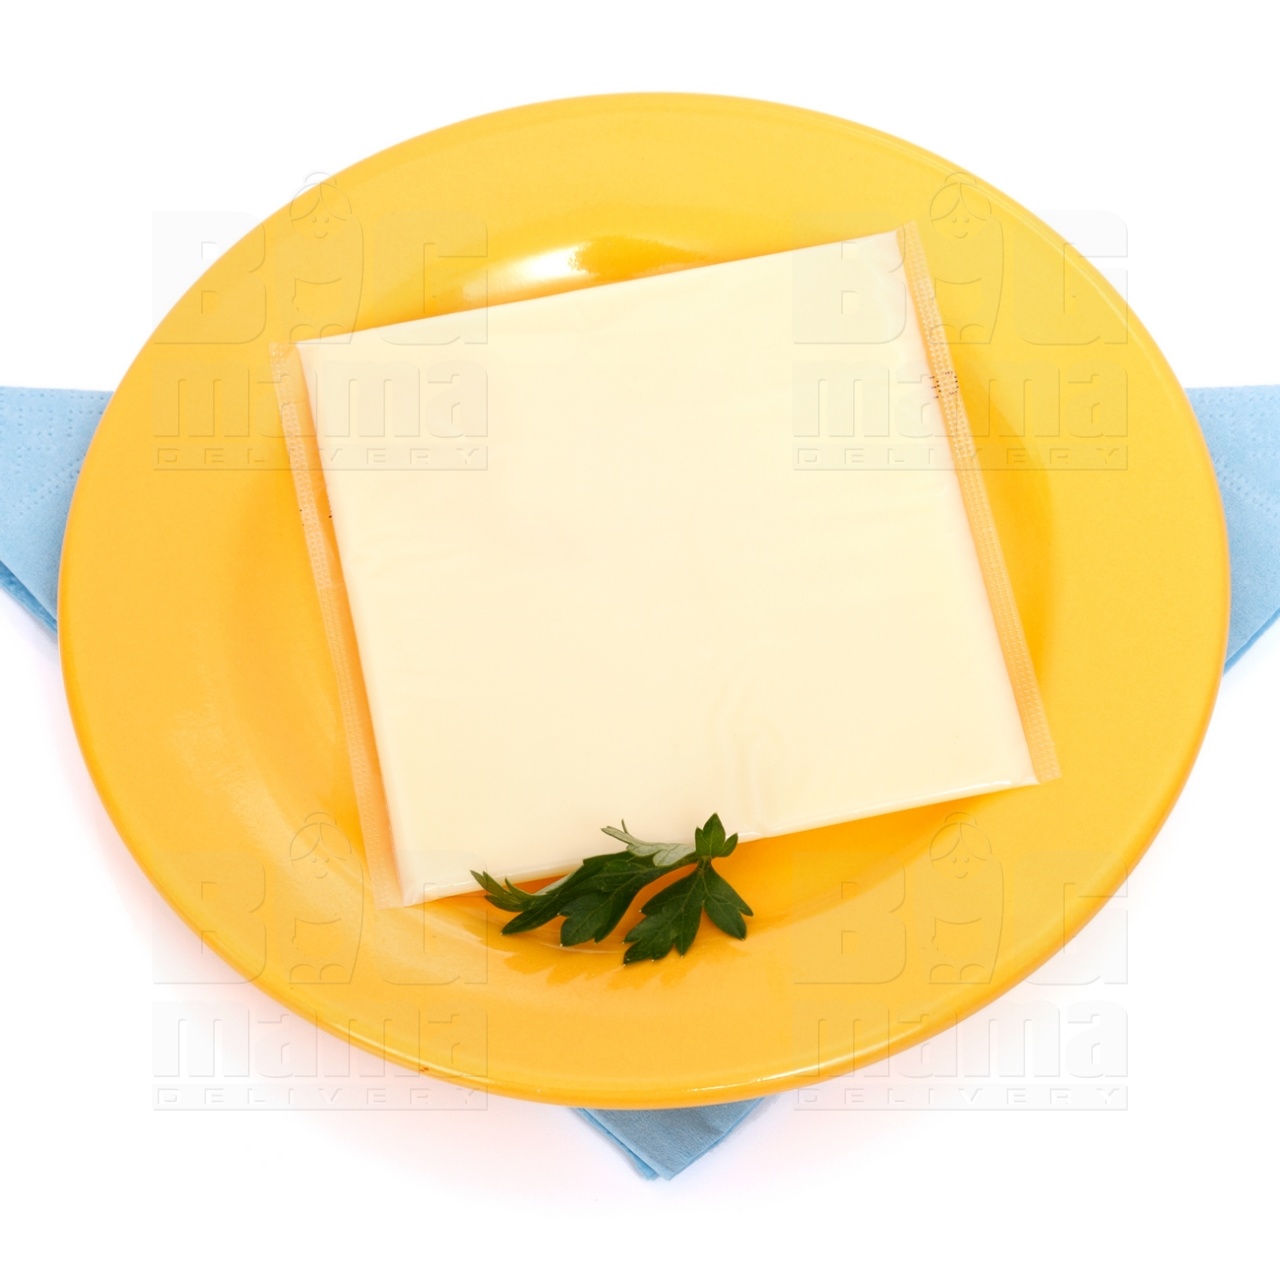 Product #83 image - Cheese slices